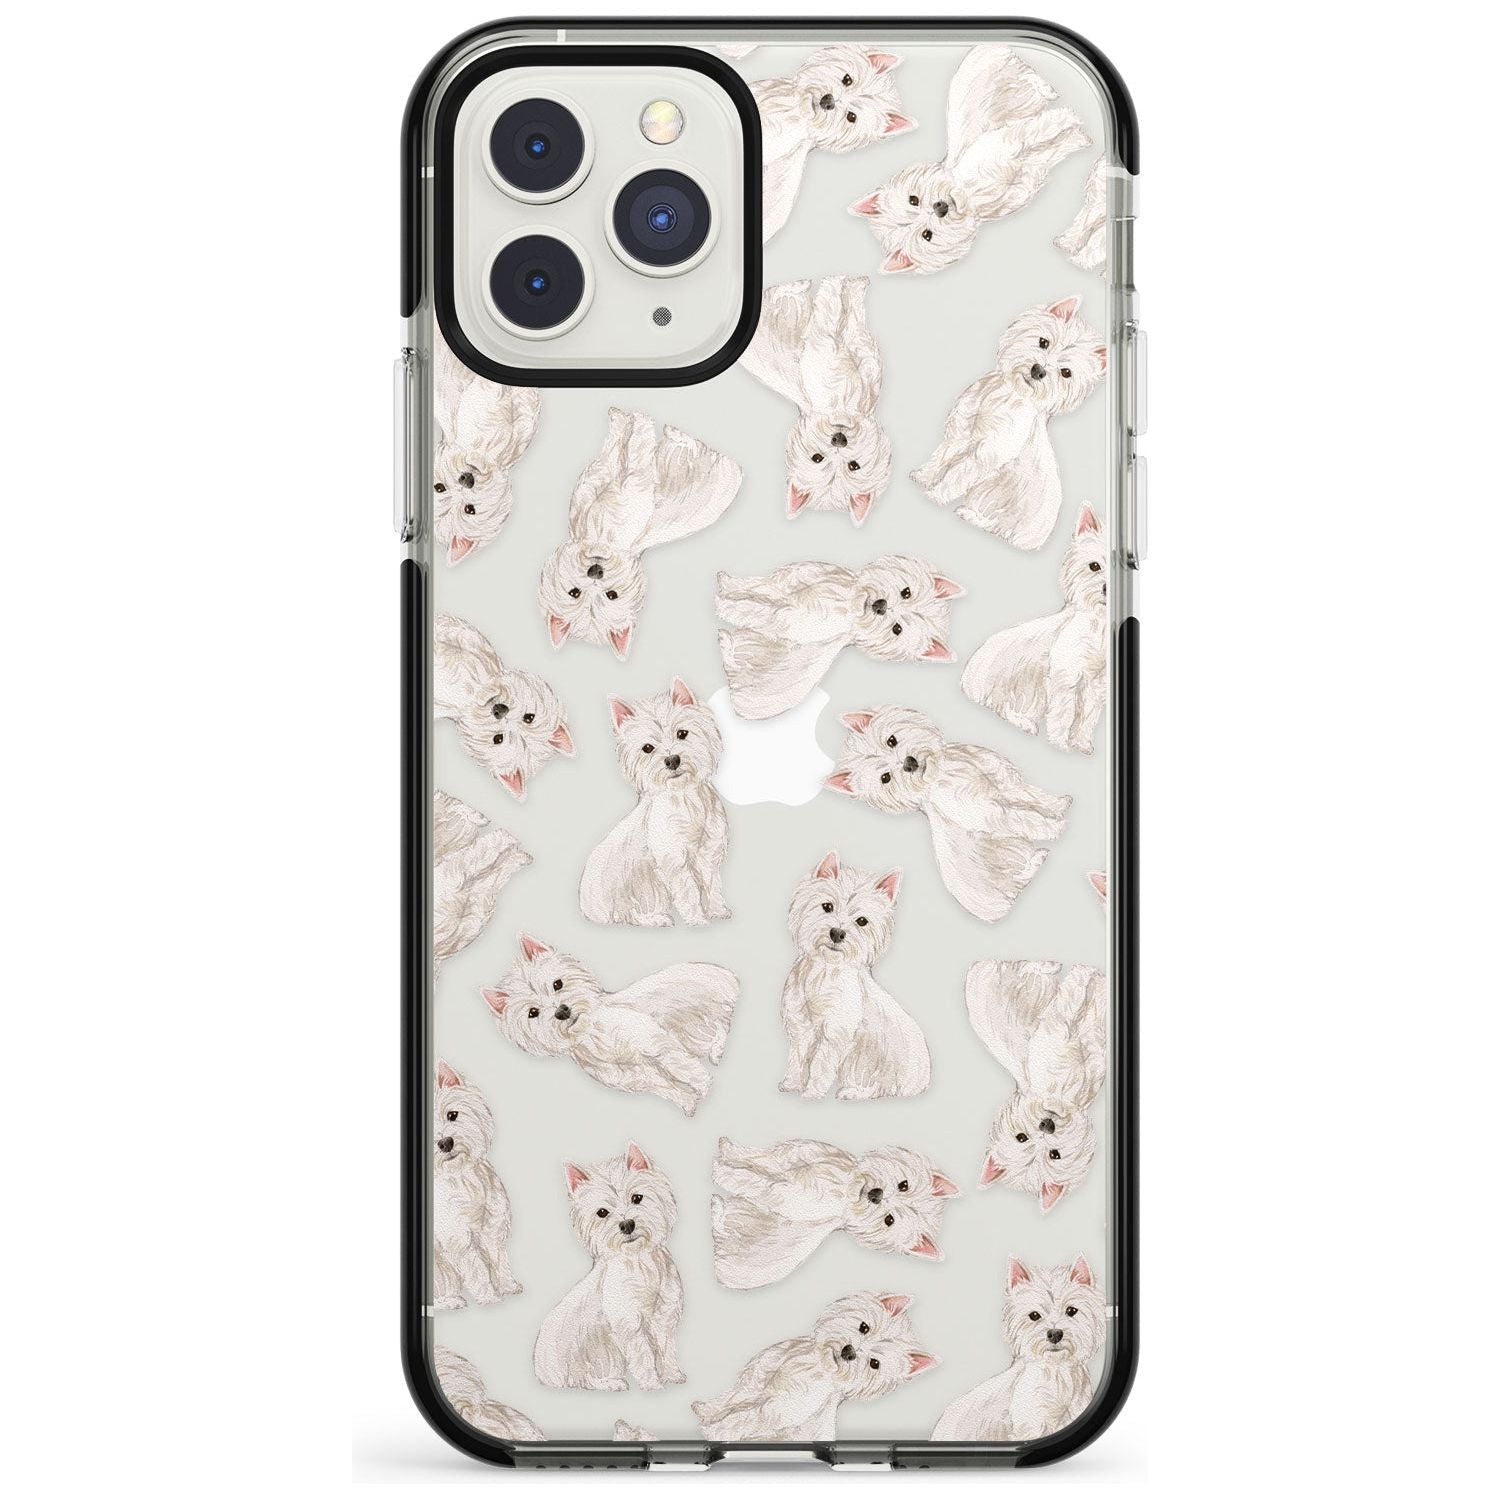 Westie Watercolour Dog Pattern Black Impact Phone Case for iPhone 11 Pro Max